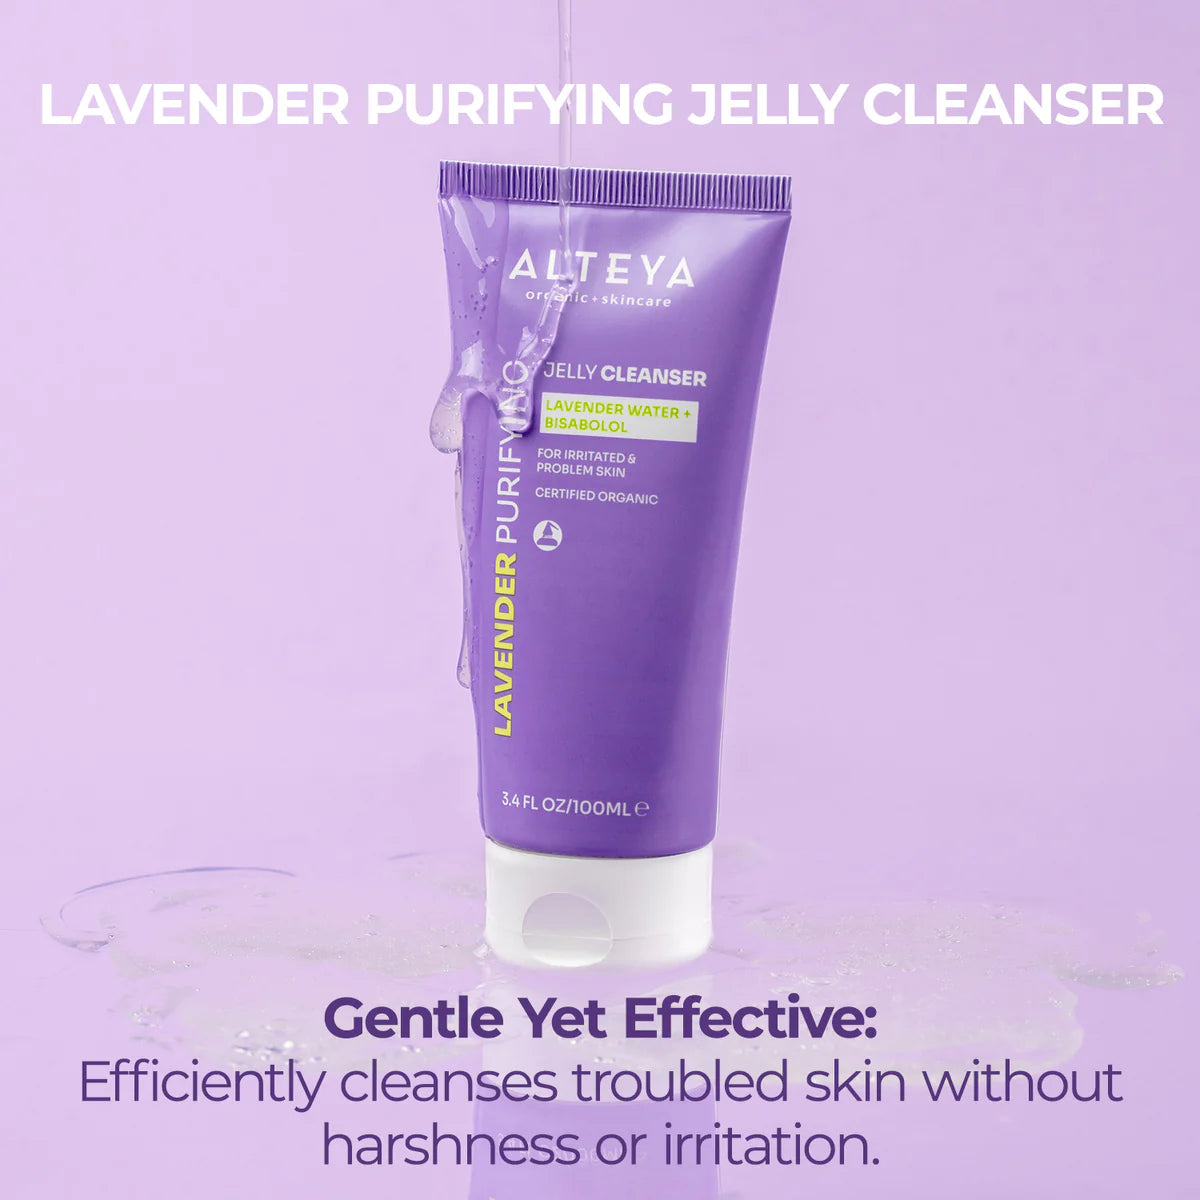 This Alteya Organics Lavender Purifying Jelly Cleanser is enriched with organic lavender water and infused with bisabolol for gentle and effective purification.